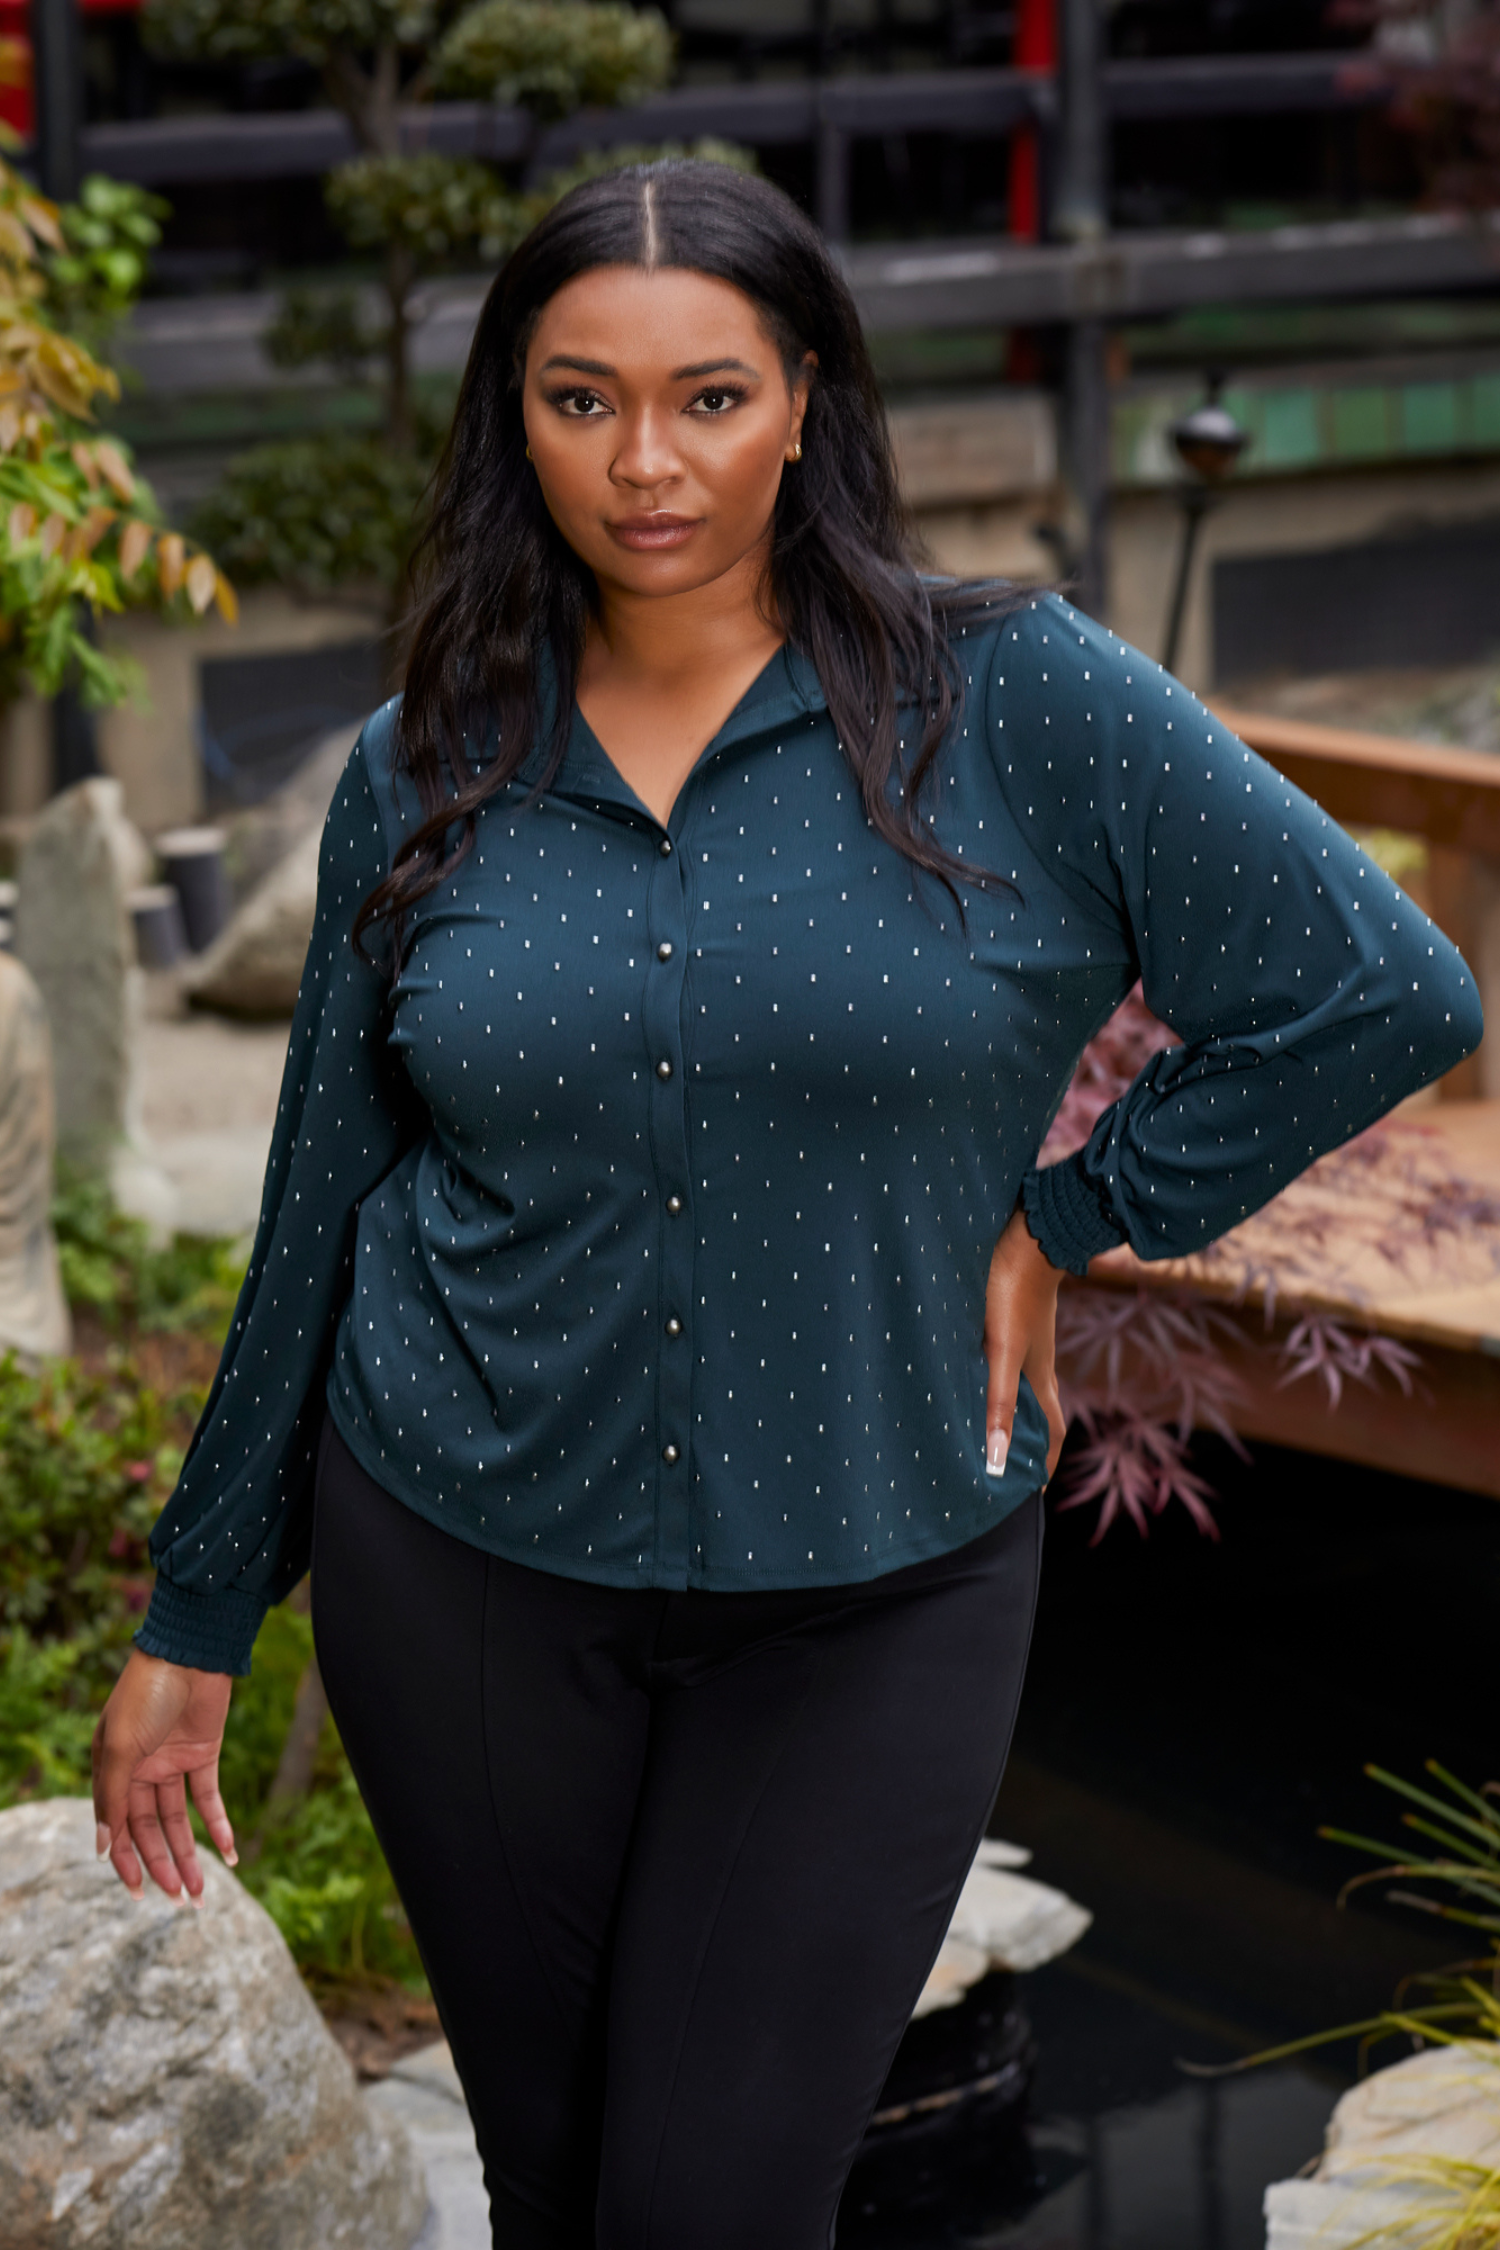 Women's Button Front Blouse with Long Blouson Sleeves in a Metallic Gel Print Jersey | Curvy